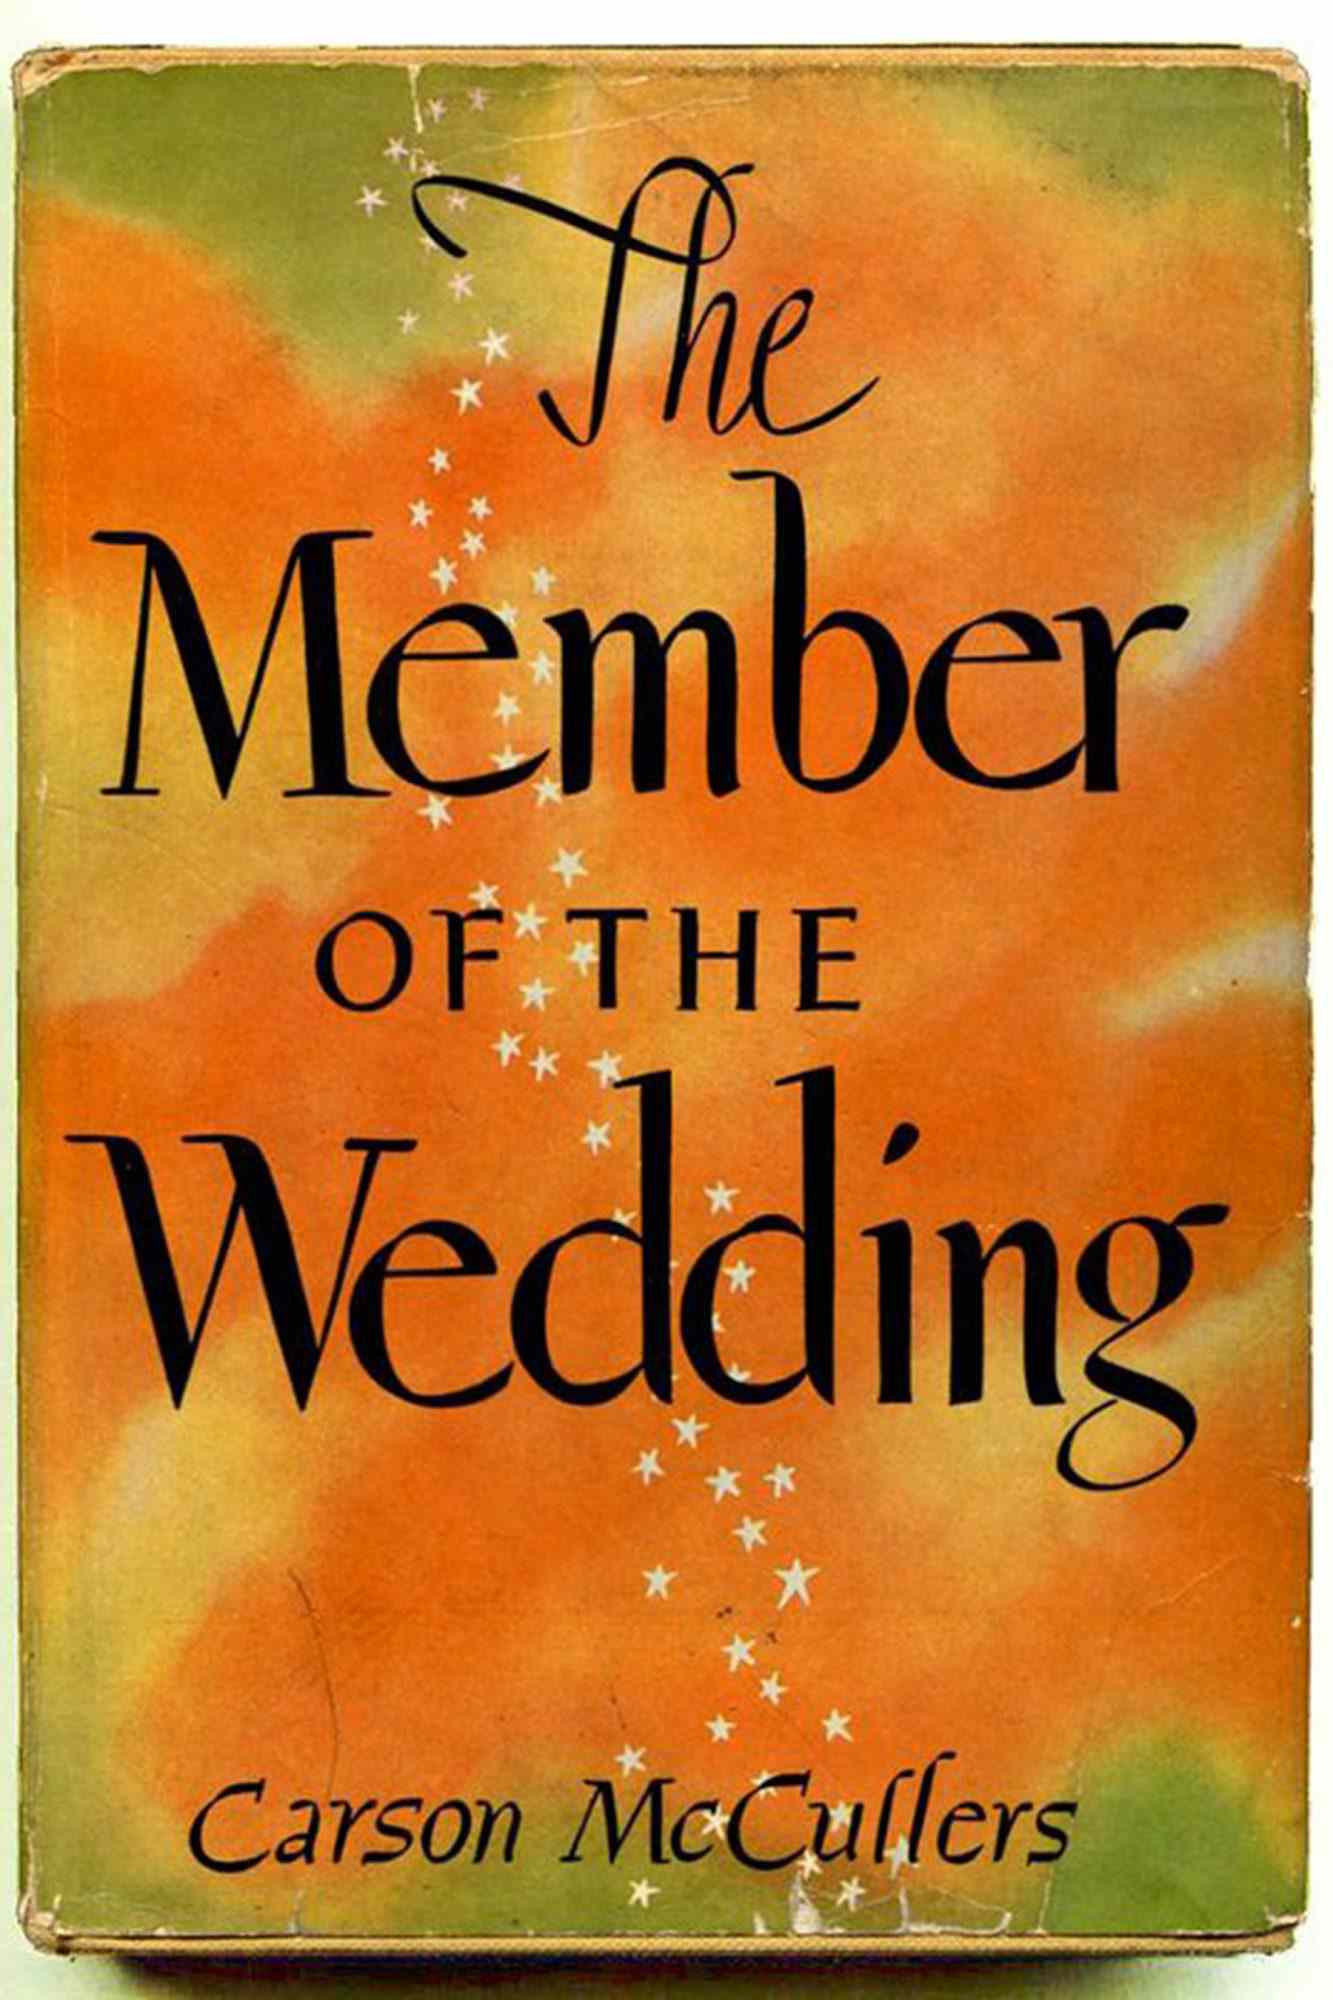 Carson McCullers,&nbsp;The Member of the Wedding